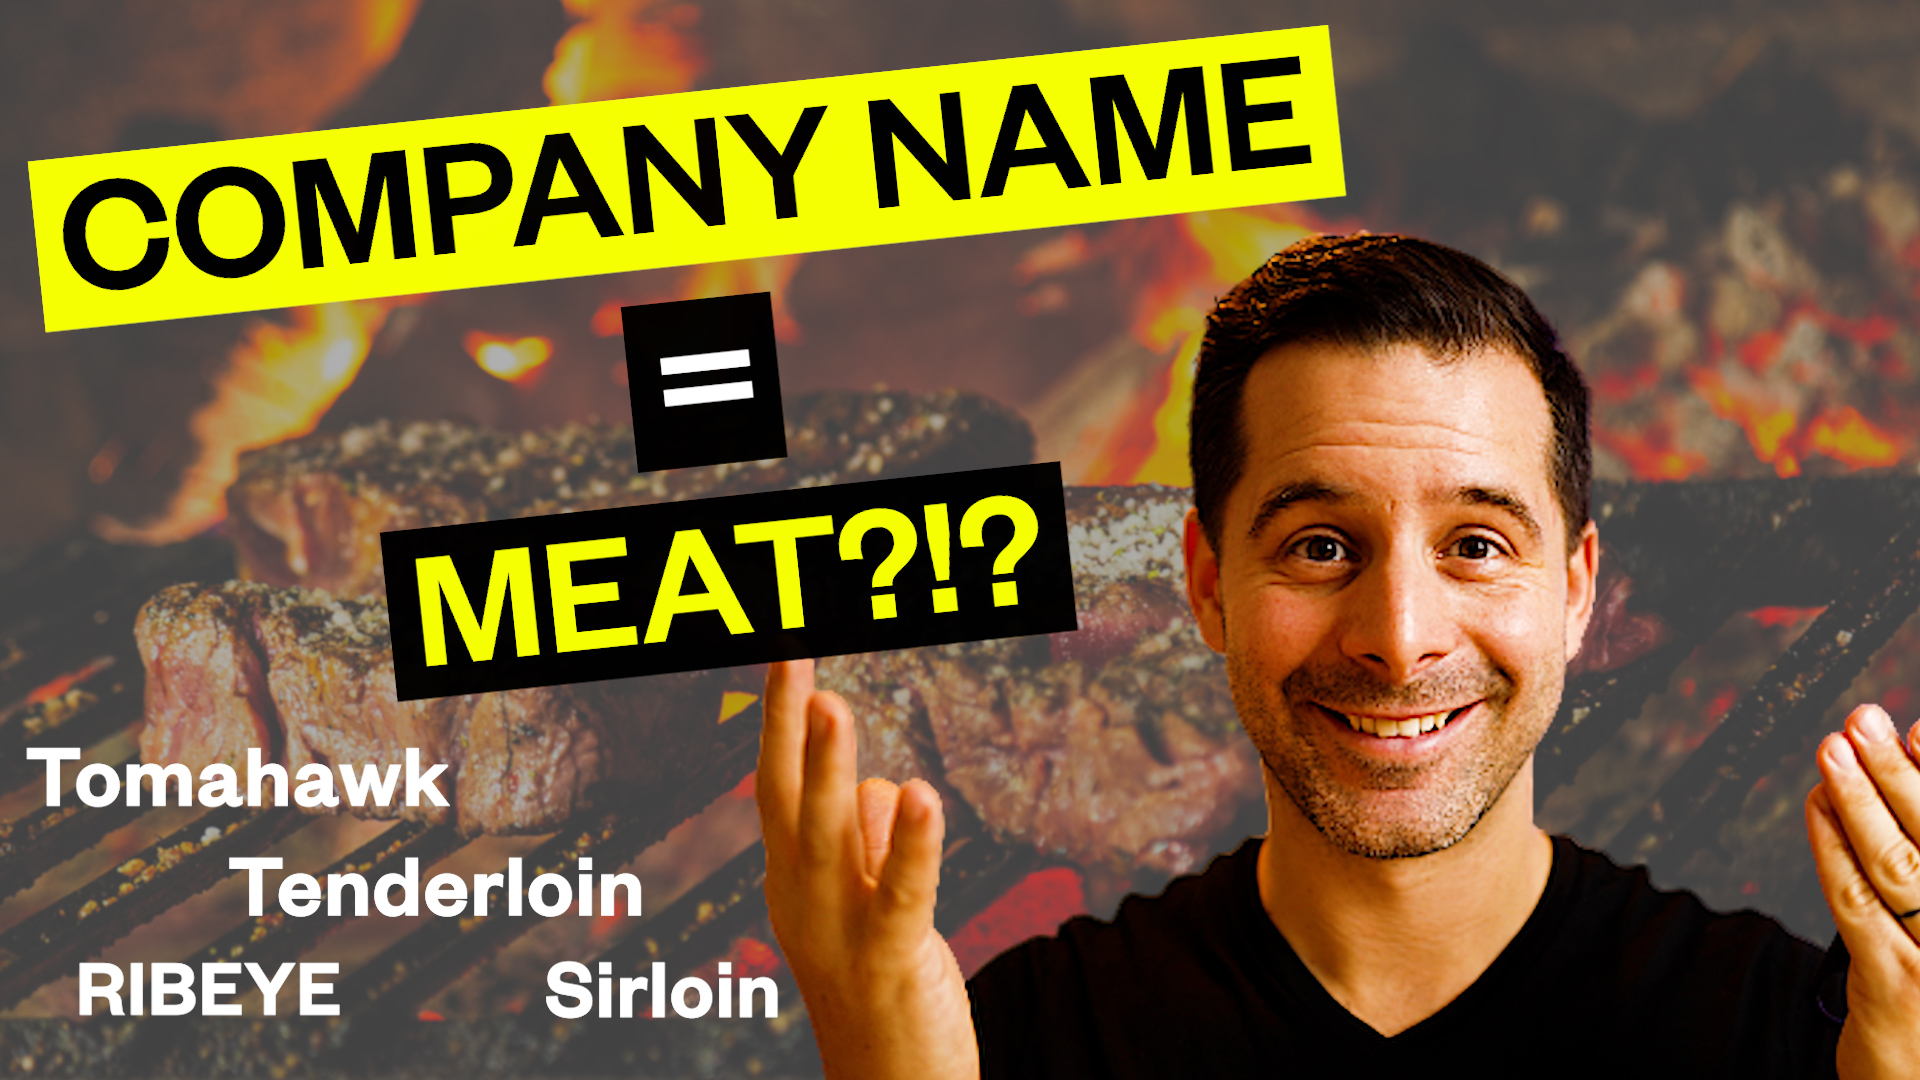 All My Companies Sound Like a Piece of Meat - Why?